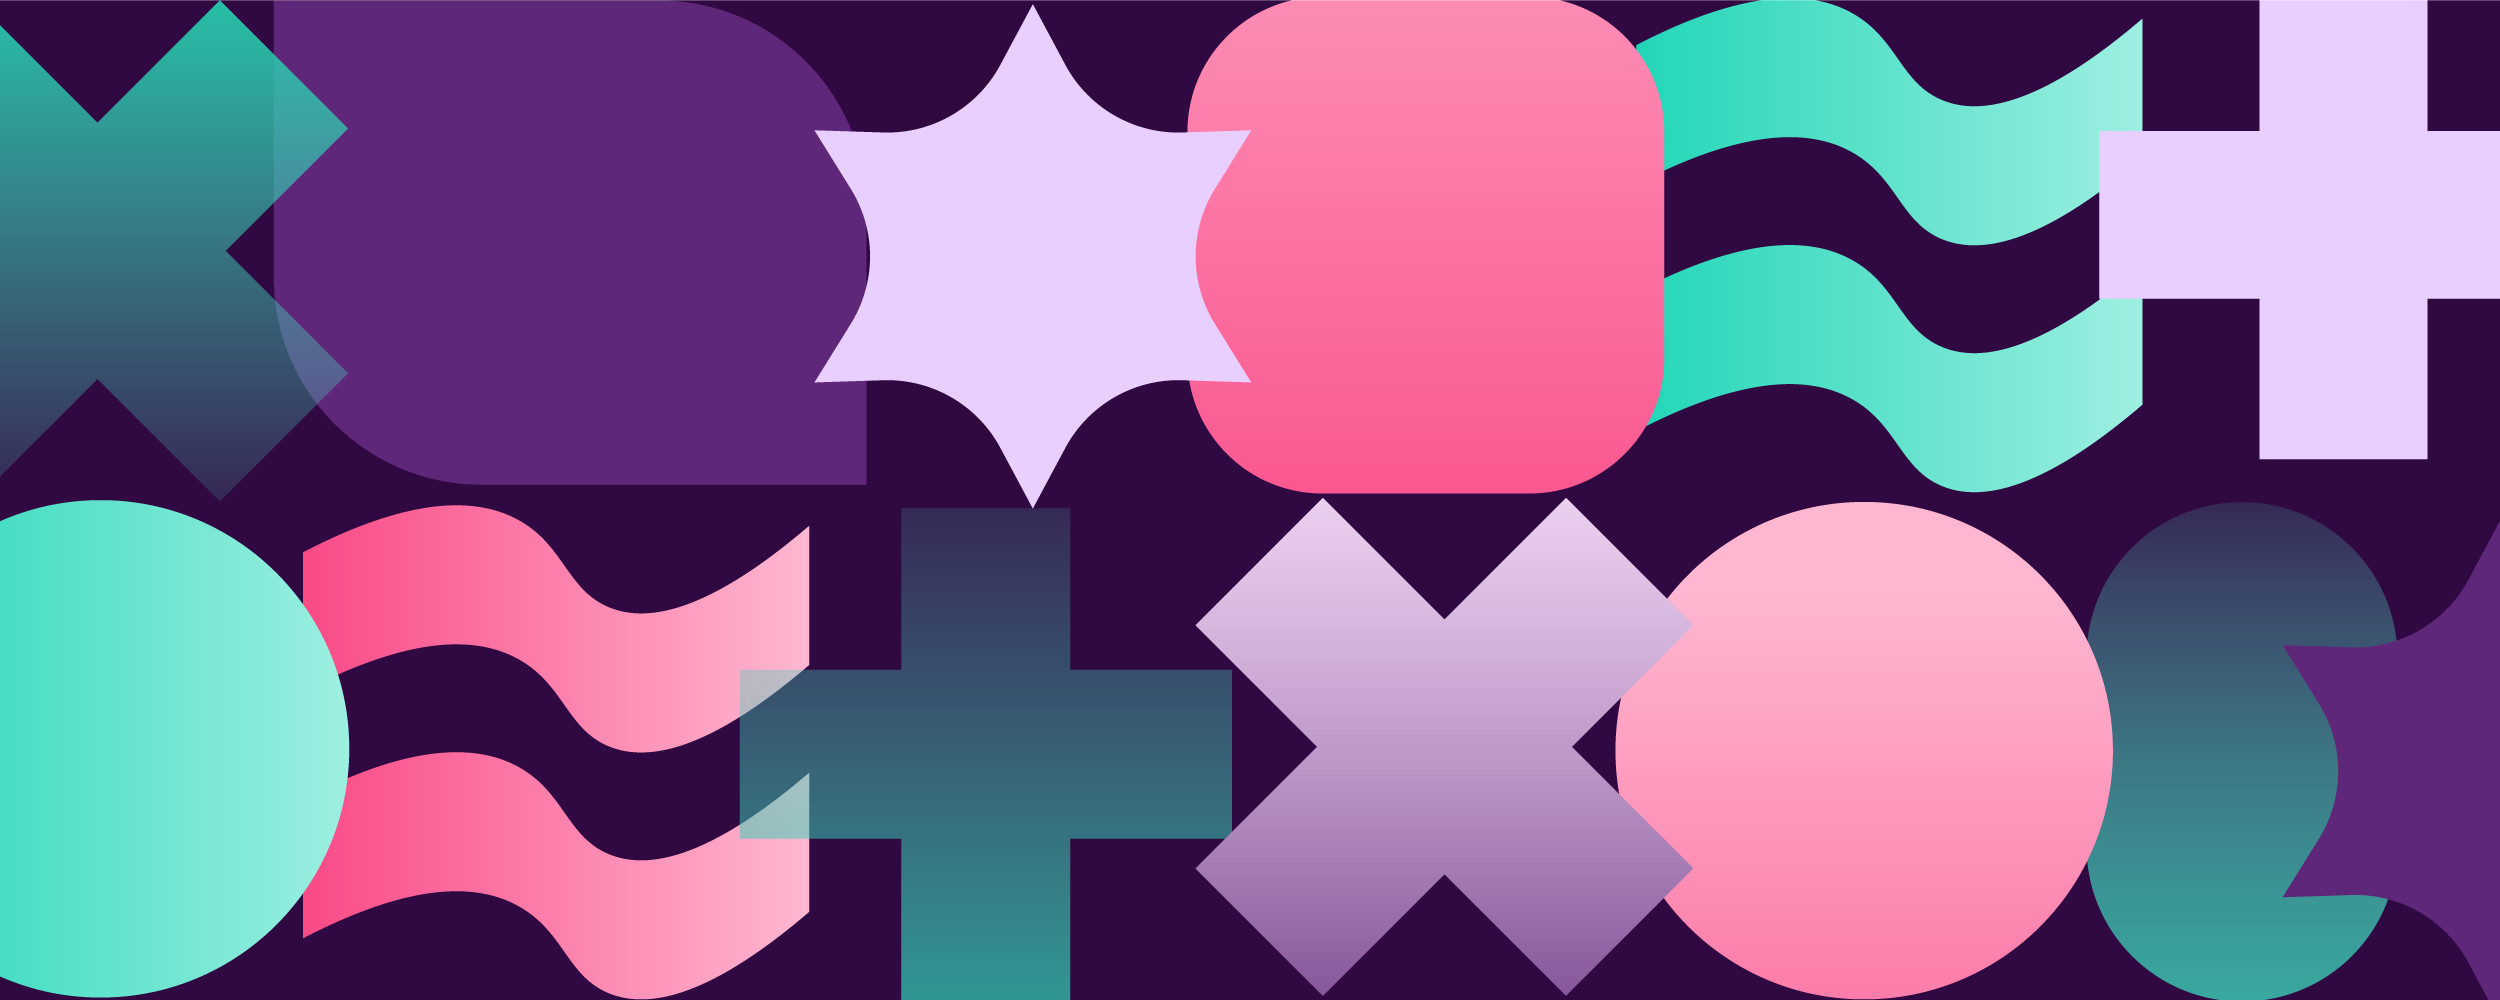 Illustration: Multicolored icons sit on a dark purple background to illustrate Ally's commitment to inclusive design.